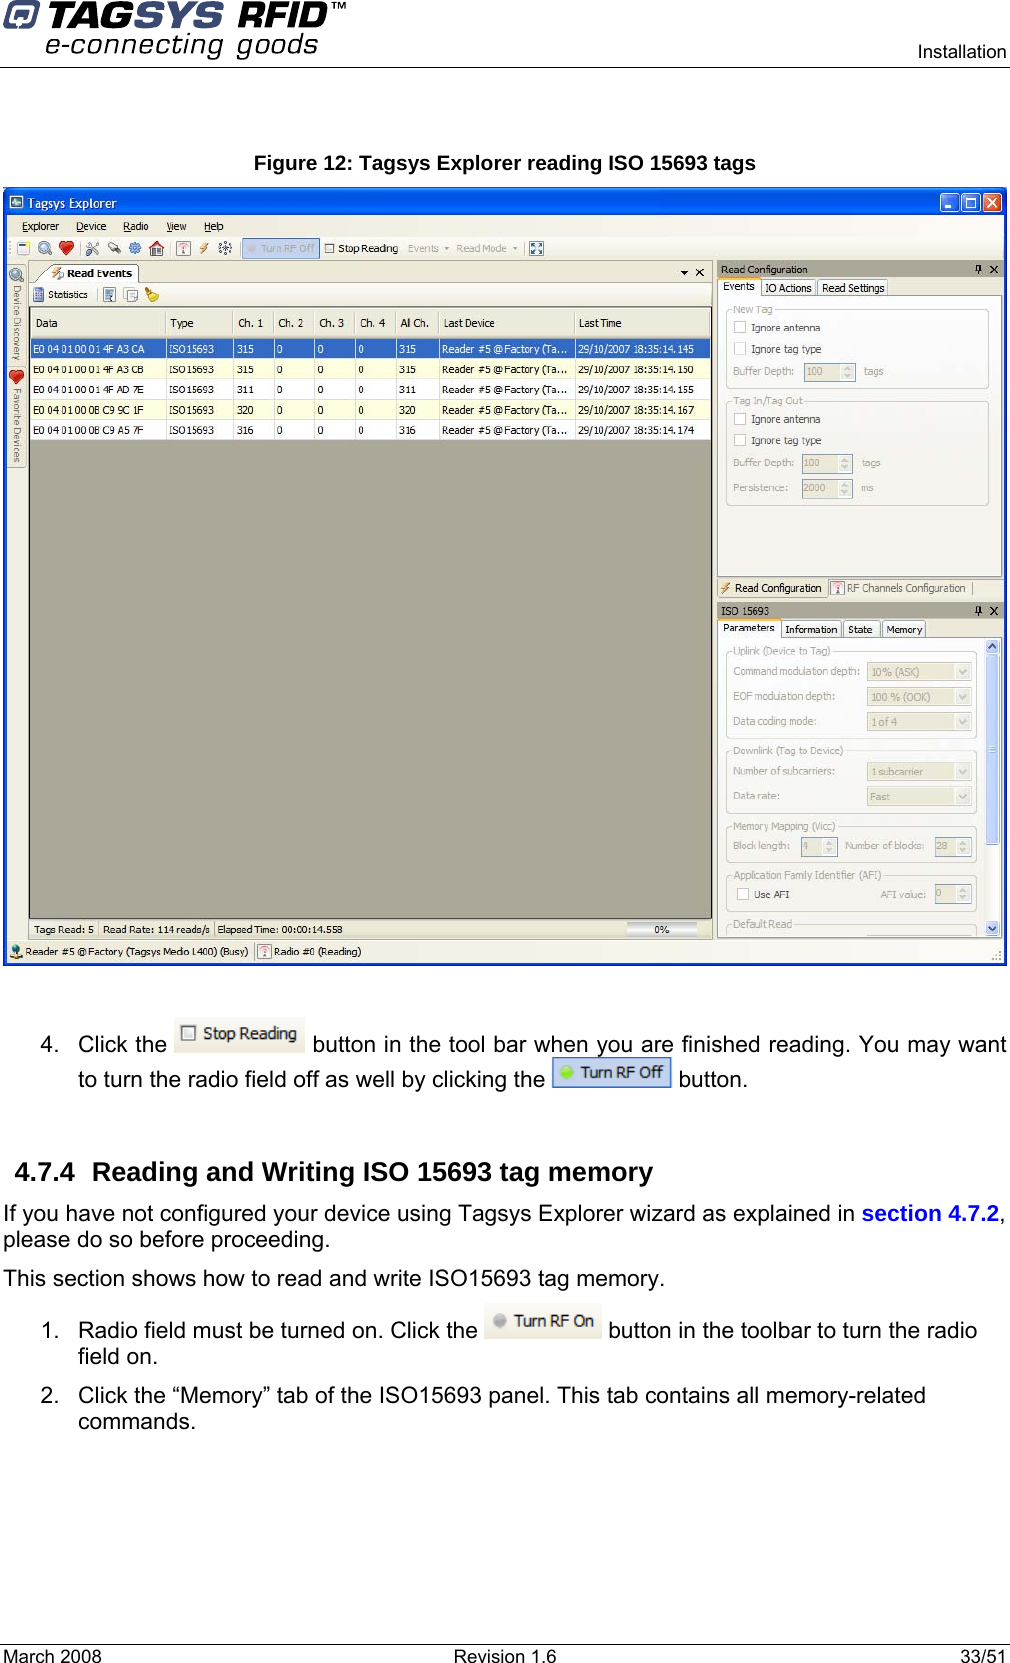      Installation March 2008  Revision 1.6  33/51   Figure 12: Tagsys Explorer reading ISO 15693 tags   4. Click the   button in the tool bar when you are finished reading. You may want to turn the radio field off as well by clicking the   button.  4.7.4  Reading and Writing ISO 15693 tag memory If you have not configured your device using Tagsys Explorer wizard as explained in section 4.7.2, please do so before proceeding. This section shows how to read and write ISO15693 tag memory. 1.  Radio field must be turned on. Click the   button in the toolbar to turn the radio field on. 2.  Click the “Memory” tab of the ISO15693 panel. This tab contains all memory-related commands. 